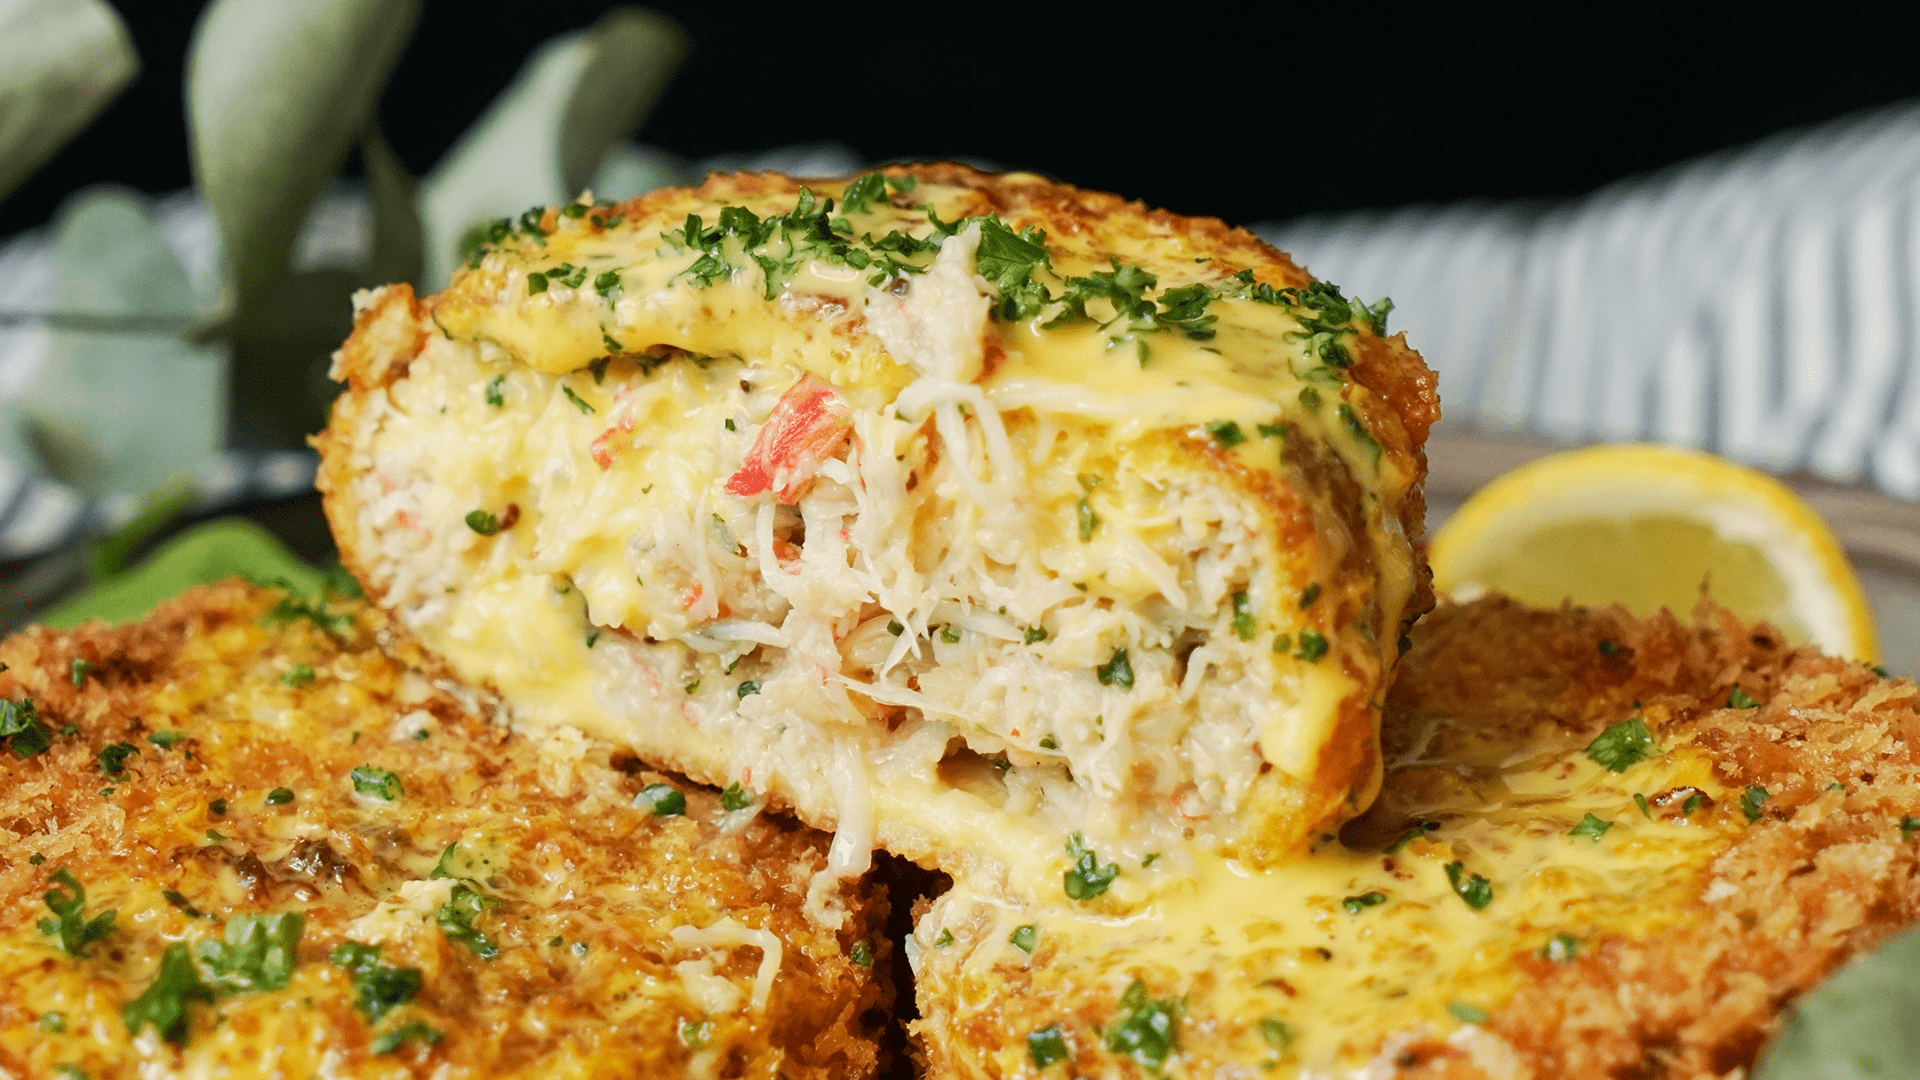 Deep South Dish: Baked Crab Cakes with Creamy Jalapeno Sauce